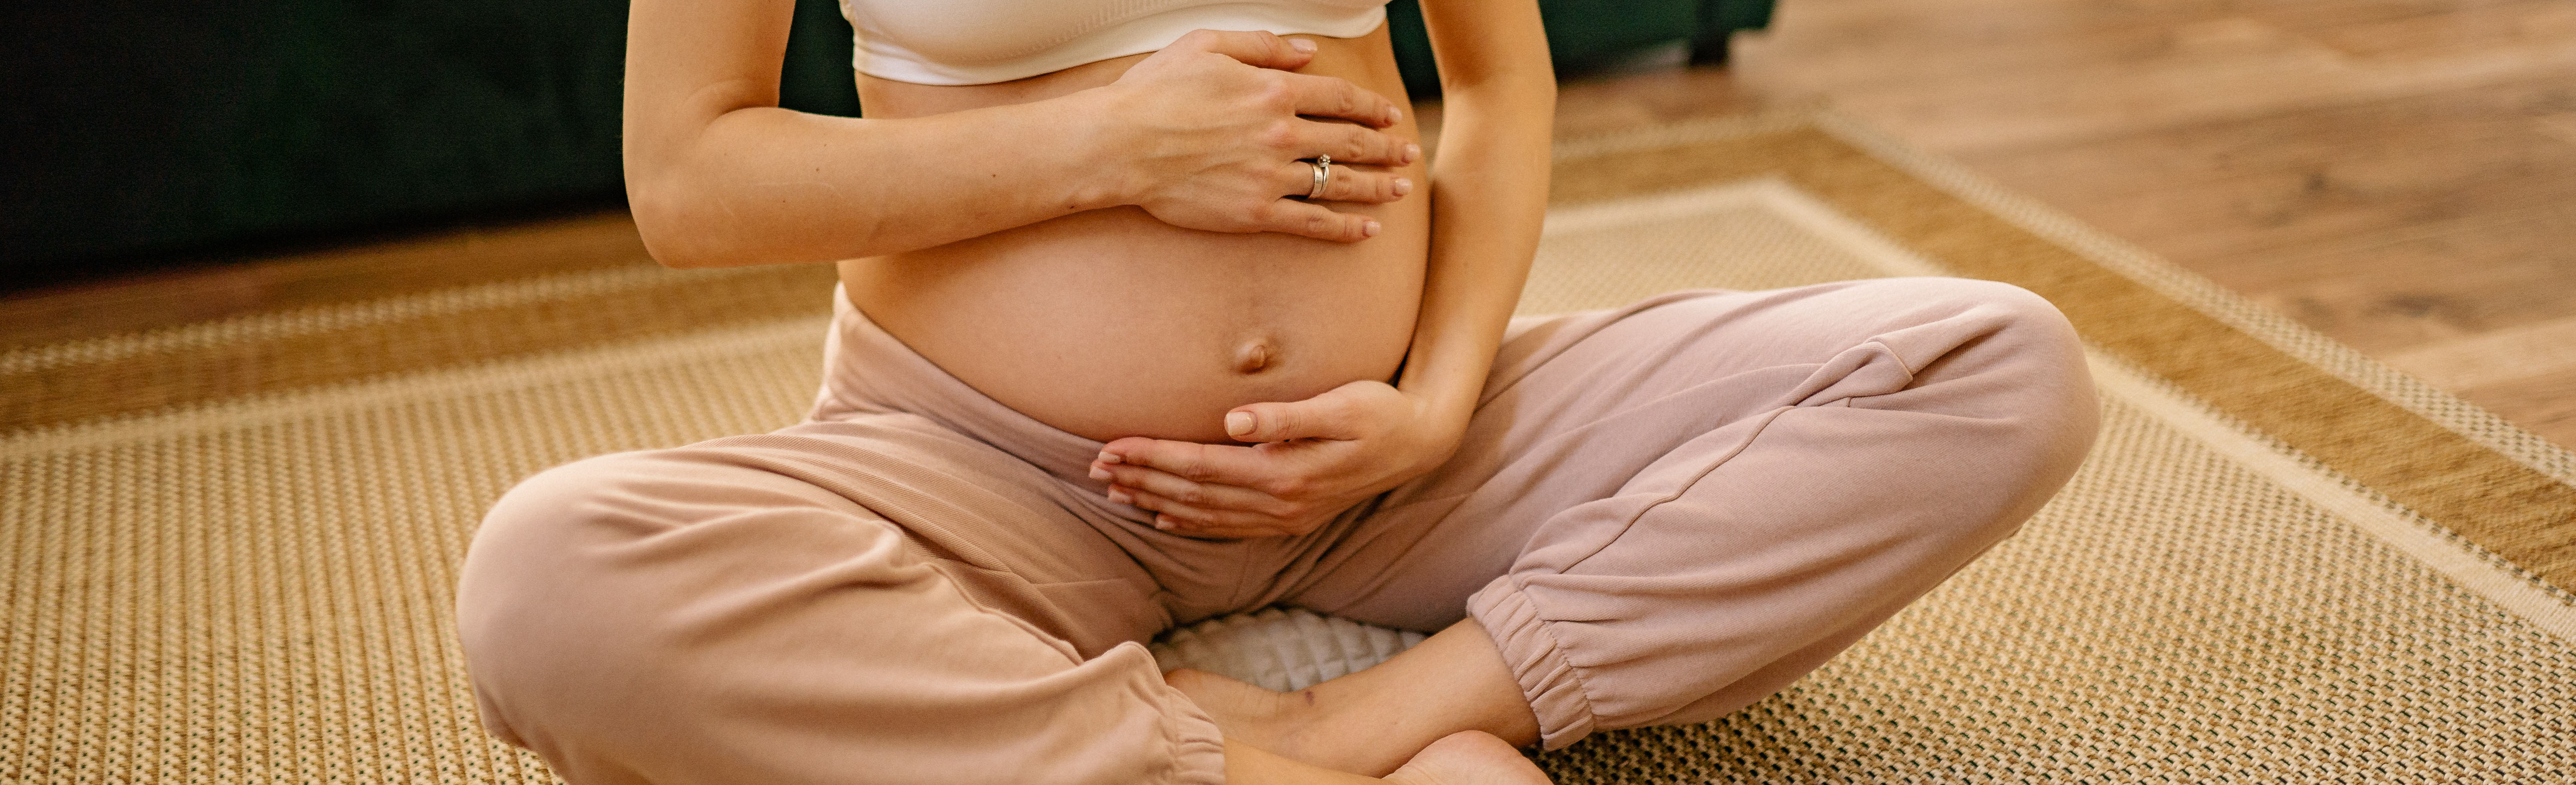 pregnant woman seated on floor cradling stomach in hands